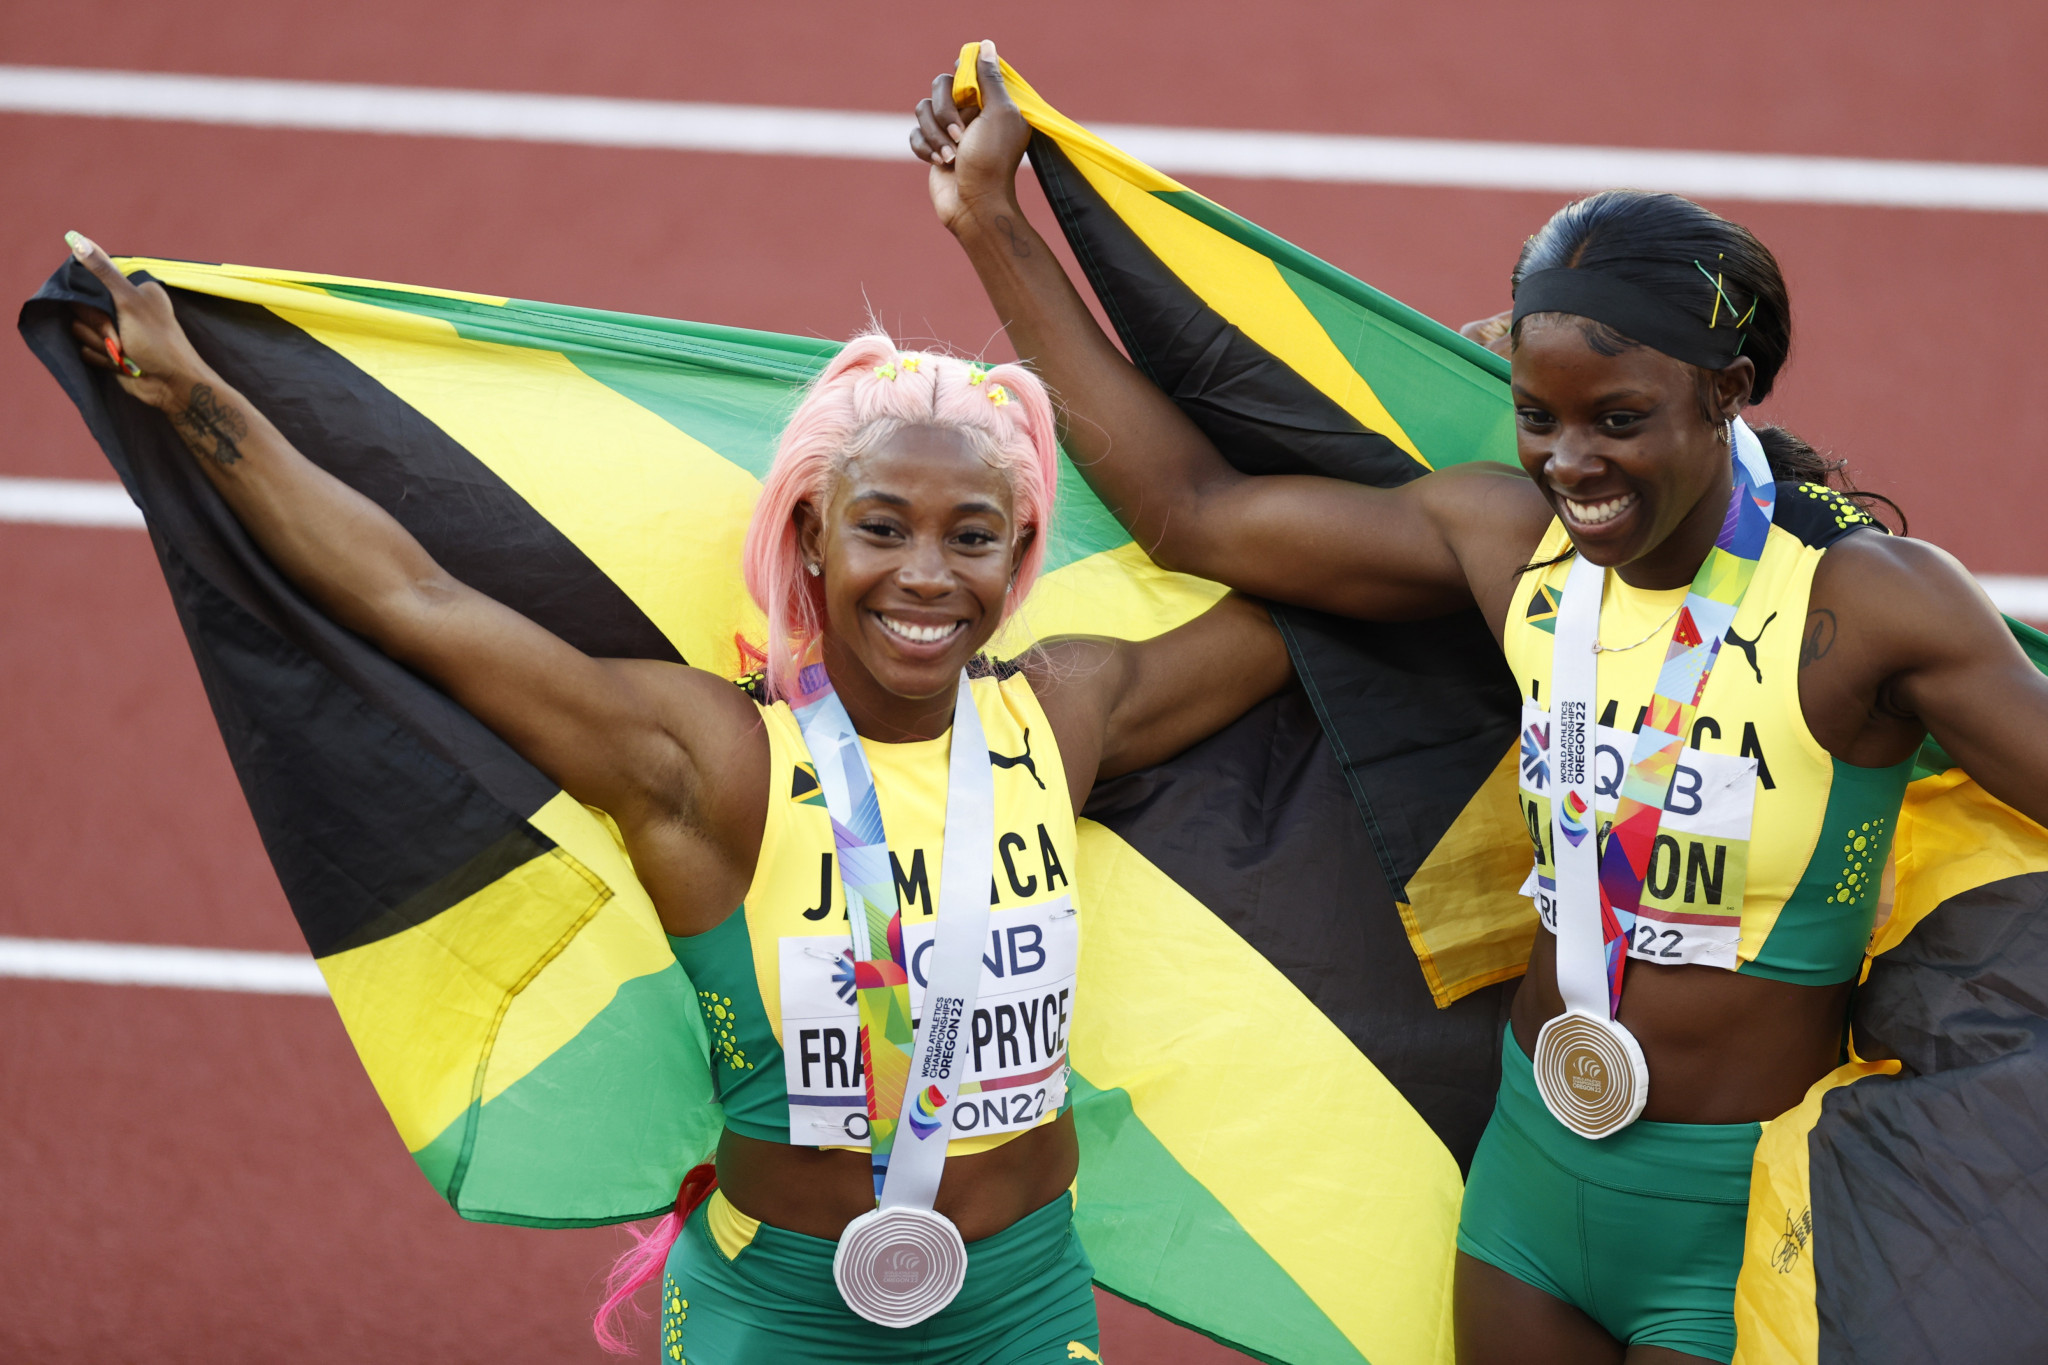 Fraser-Pryce and Jackson to play it again at Zurich's two-day Wanda Diamond League final